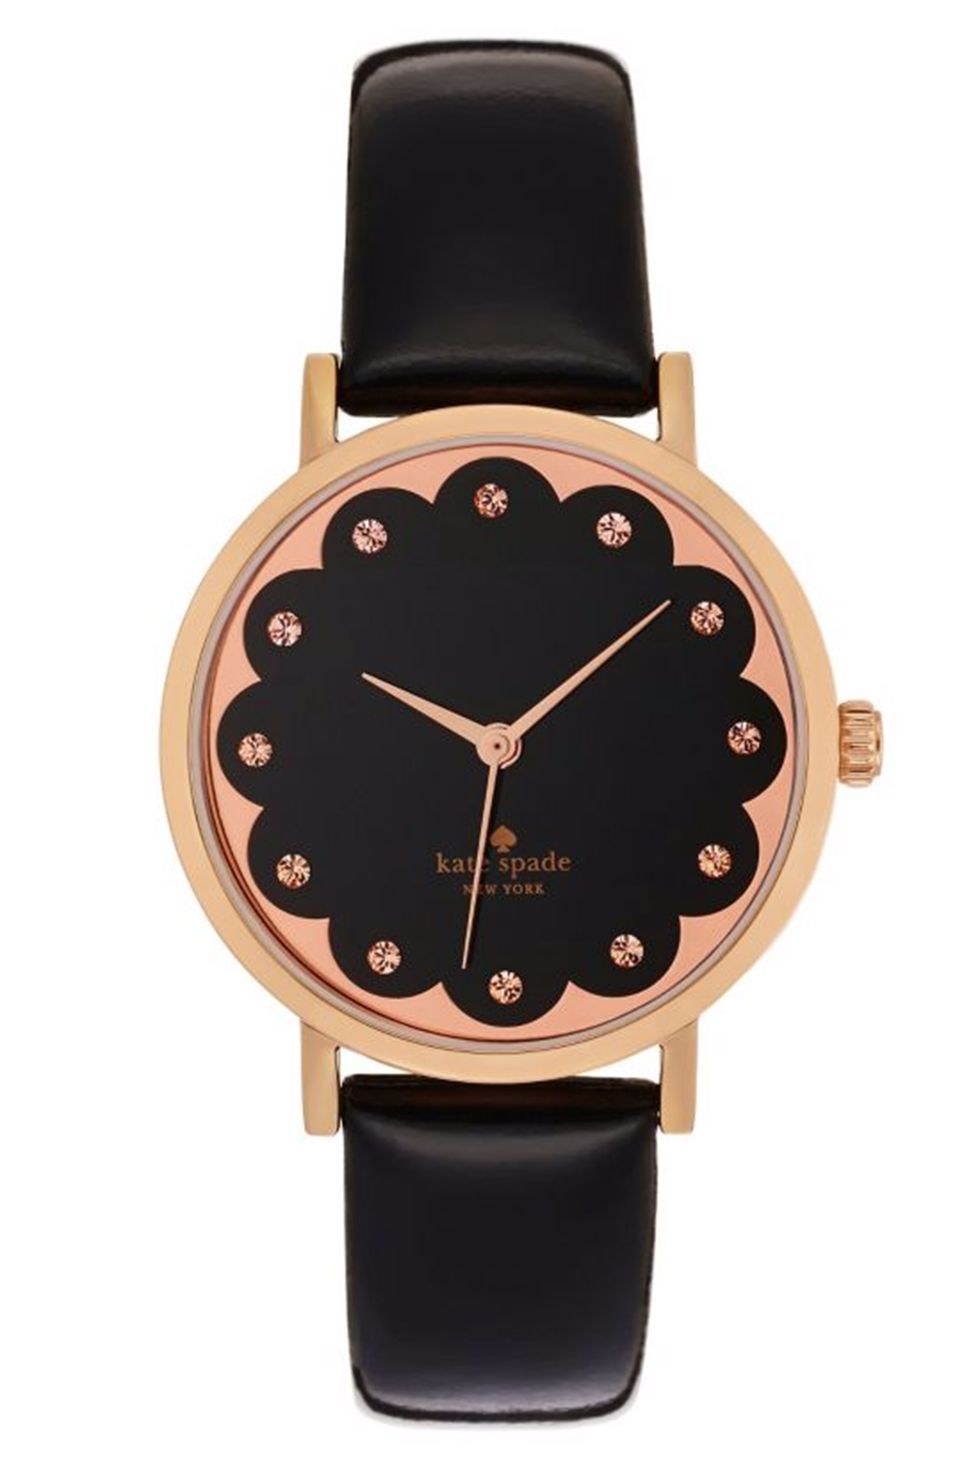 <p>Orologio che combina un <strong data-redactor-tag="strong" data-verified="redactor">cinturino in pelle</strong> nera con una <strong data-redactor-tag="strong" data-verified="redactor">cassa in oro rosa</strong> dal&nbsp;motivo romantico,&nbsp;<strong data-redactor-tag="strong" data-verified="redactor">Kate Spade</strong>,&nbsp;<em data-redactor-tag="em">Ern</em><em data-redactor-tag="em">estJones.com</em>.<span class="redactor-invisible-space" data-verified="redactor" data-redactor-tag="span" data-redactor-class="redactor-invisible-space"></span><span class="redactor-invisible-space" data-verified="redactor" data-redactor-tag="span" data-redactor-class="redactor-invisible-space"></span></p><p><a href="http://www.ernestjones.co.uk/webstore/d/4832671/kate+spade+metro+ladies%27+rose+gold+tone+strap+watch/" target="_blank" data-tracking-id="recirc-text-link"></a></p>